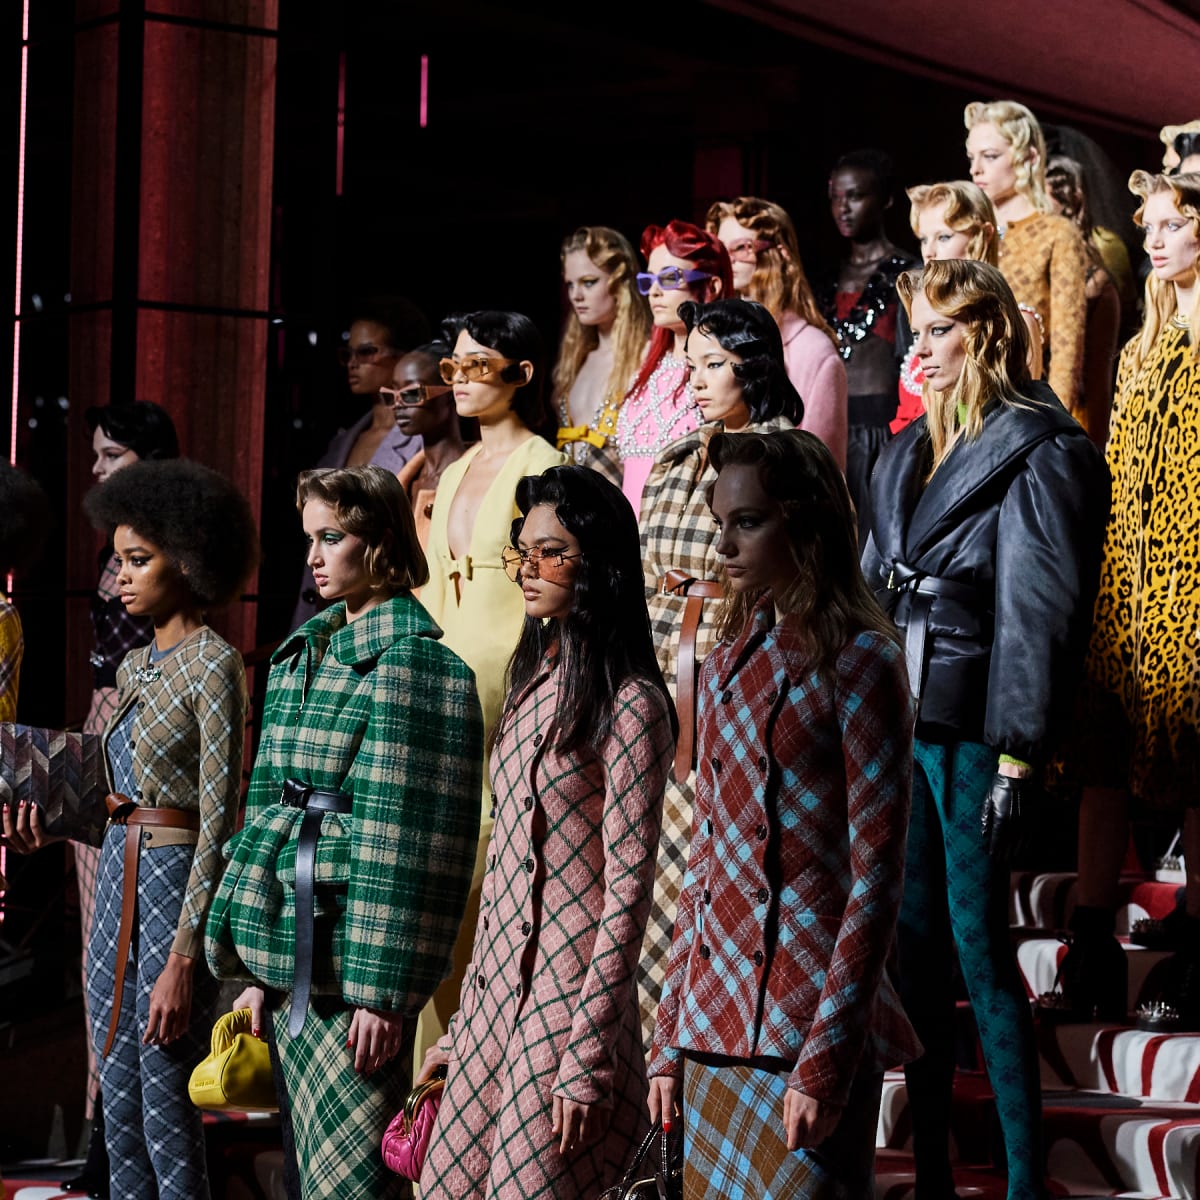 Miu Miu's Unsurprisingly Star-Studded Front Row Included Ziwe